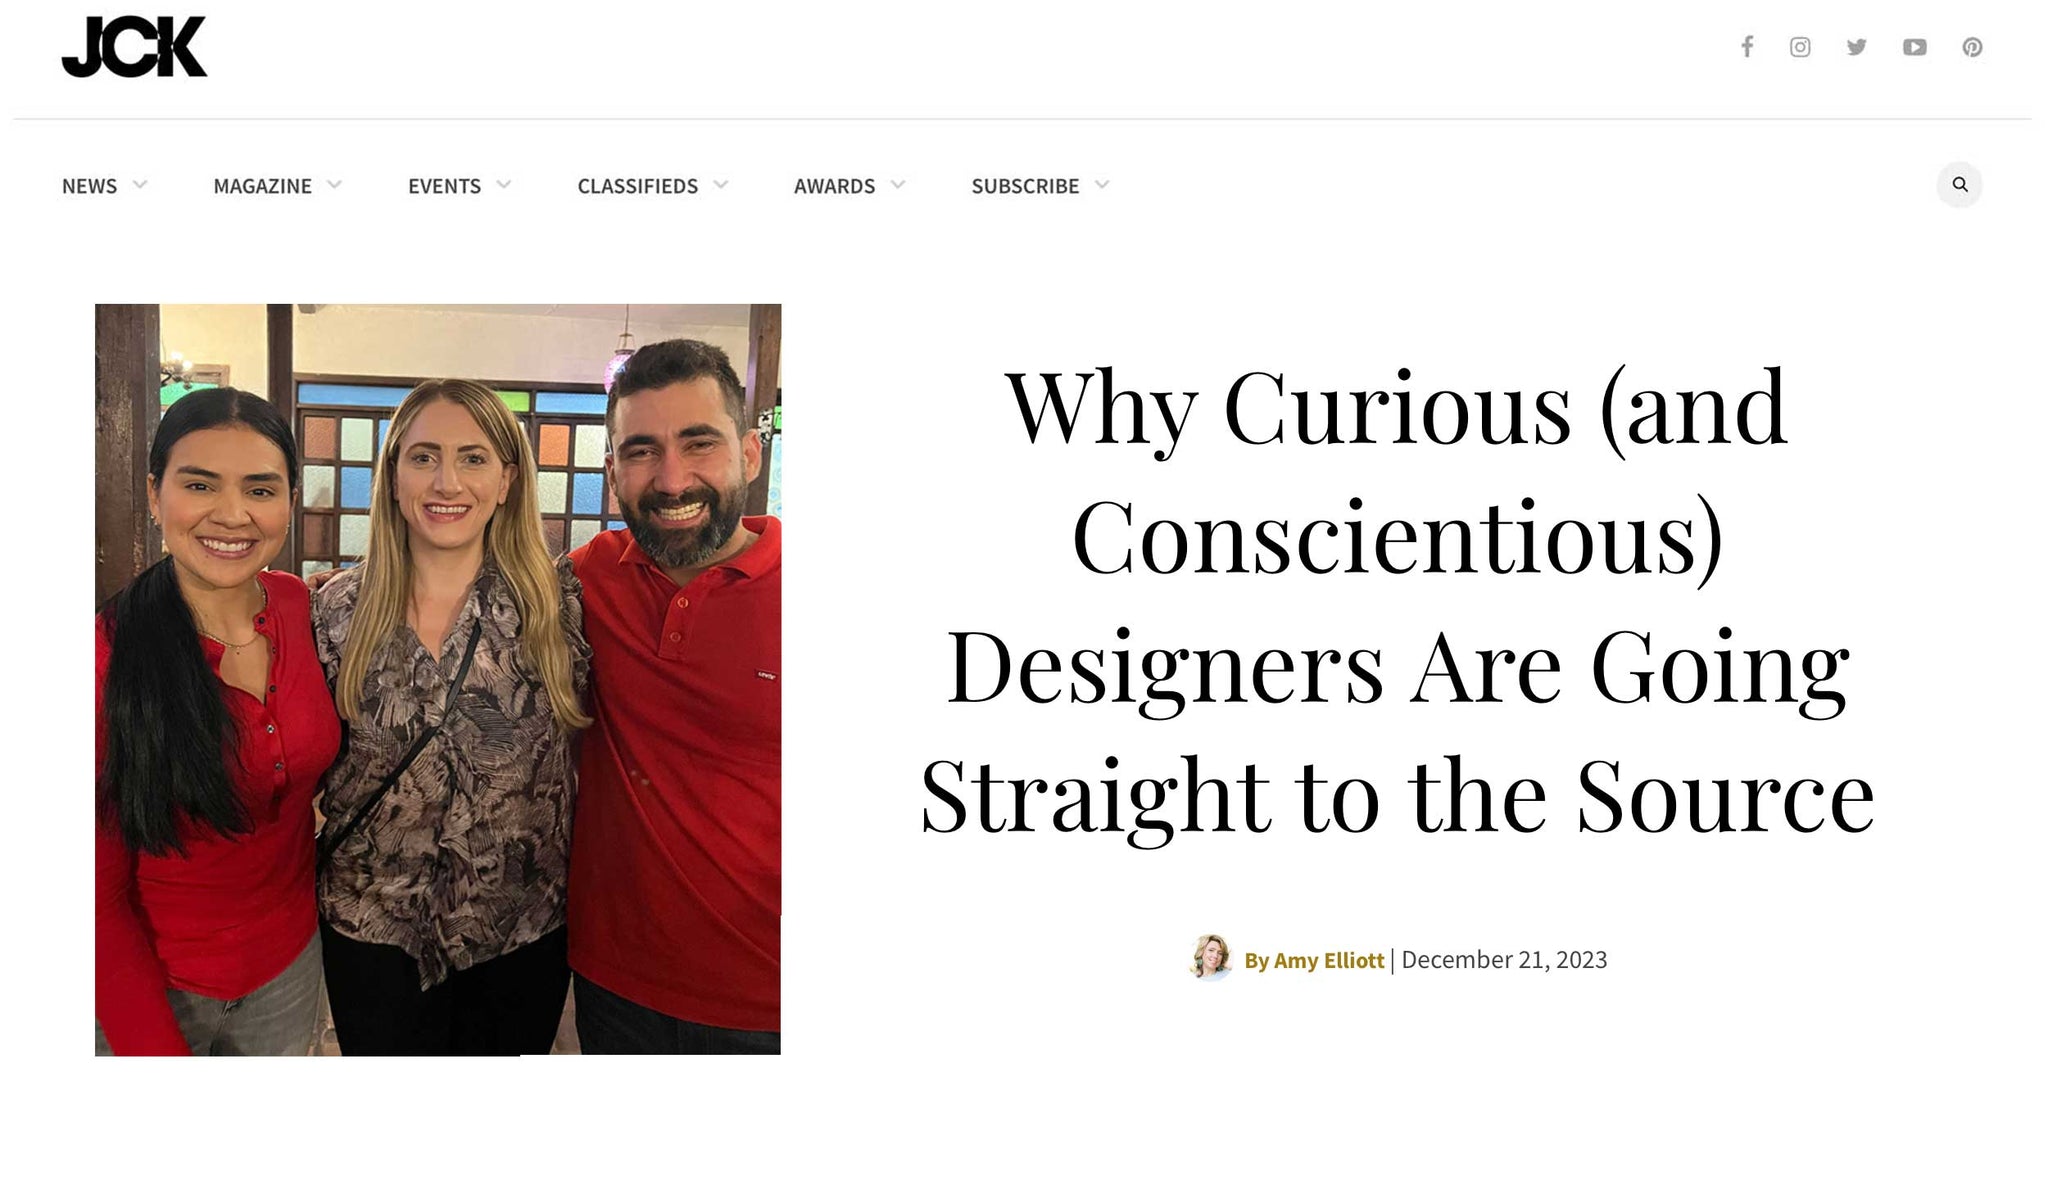 JCK Online  |  Why Curious (and Conscientious) Designers Are Going Straight to the Source